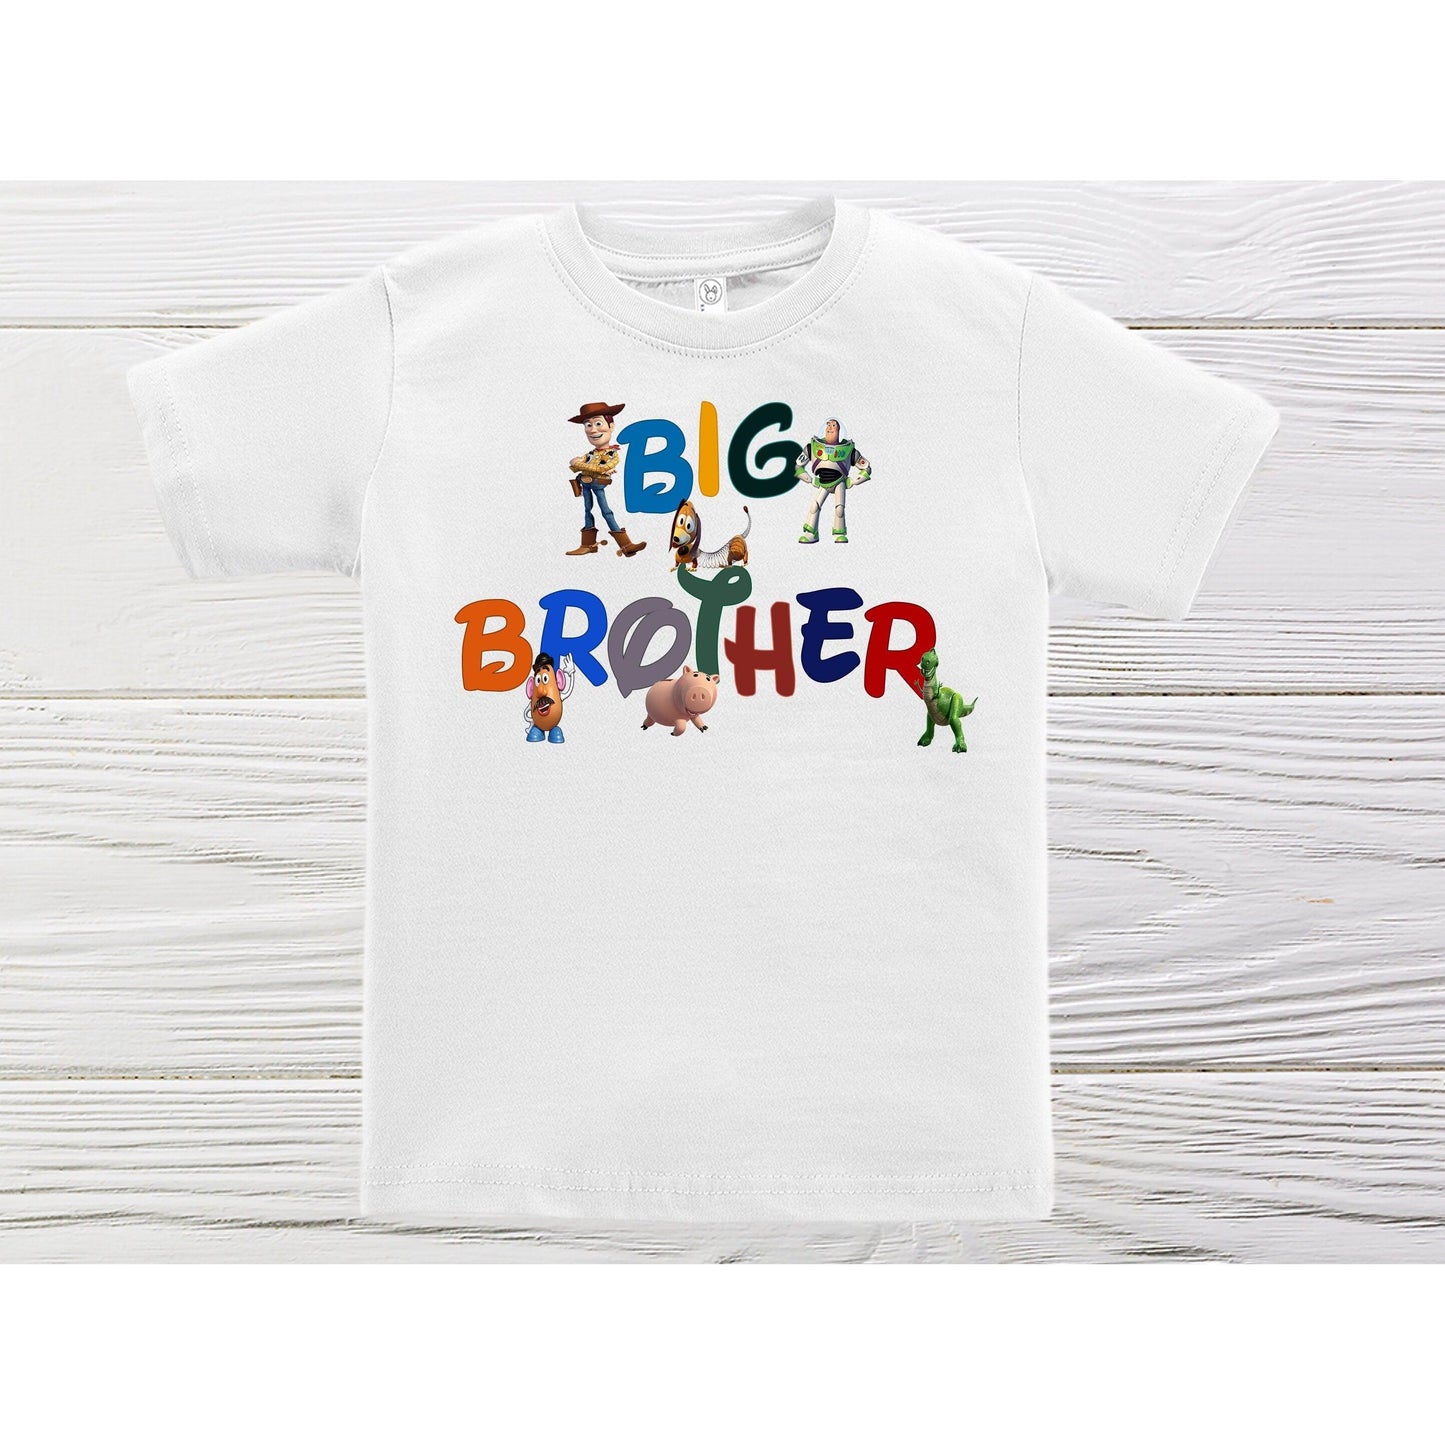 Big brother Toy Story shirt. Woody, Buzz and friends big brother shirts. Custom big brother boys shirts.